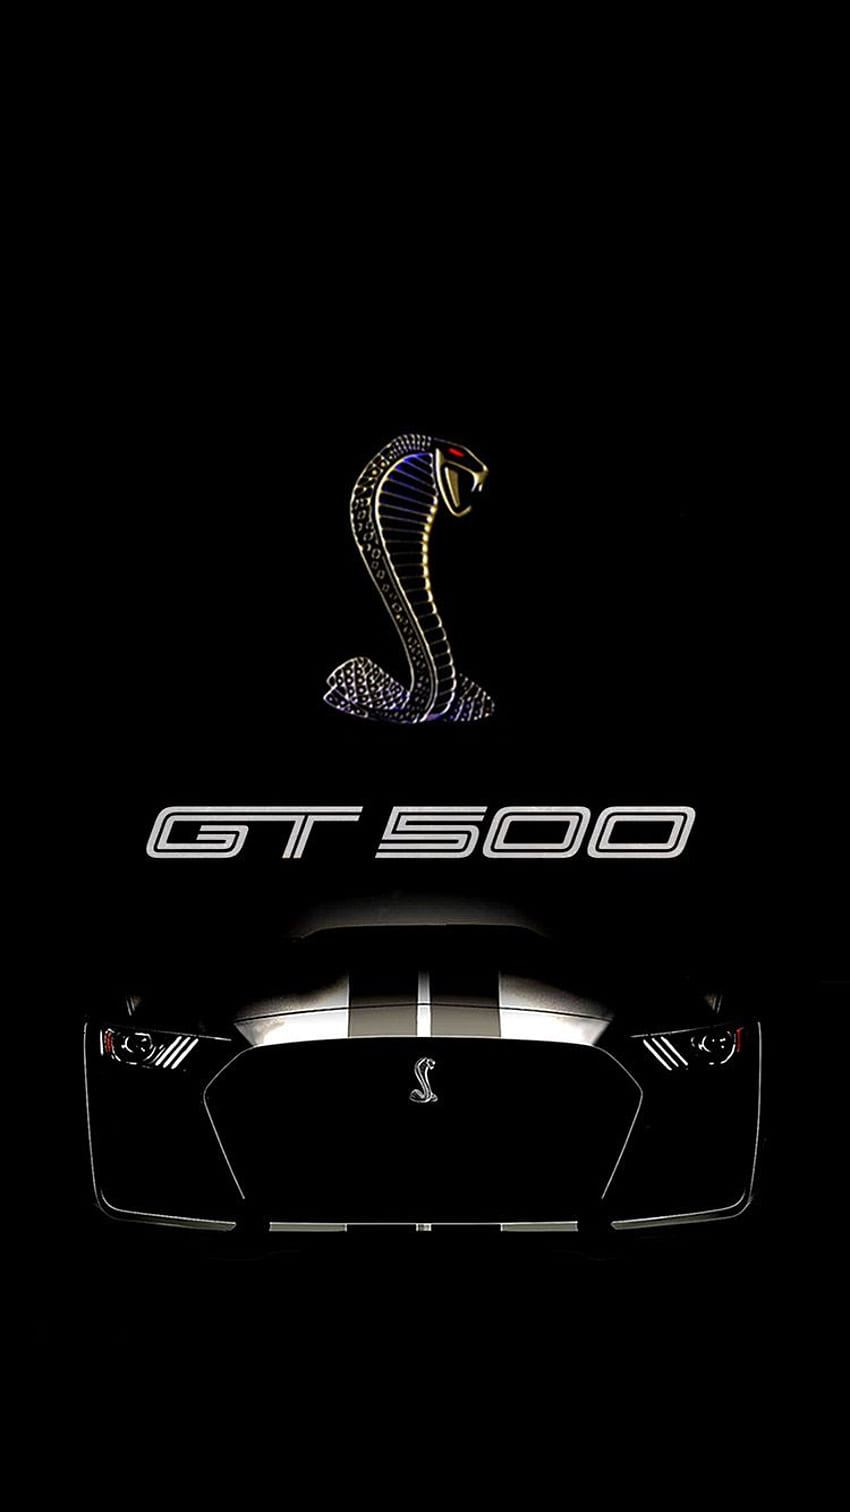 Download Treat Yourself To The Latest iPhone Featuring A Mustang Logo  Wallpaper | Wallpapers.com